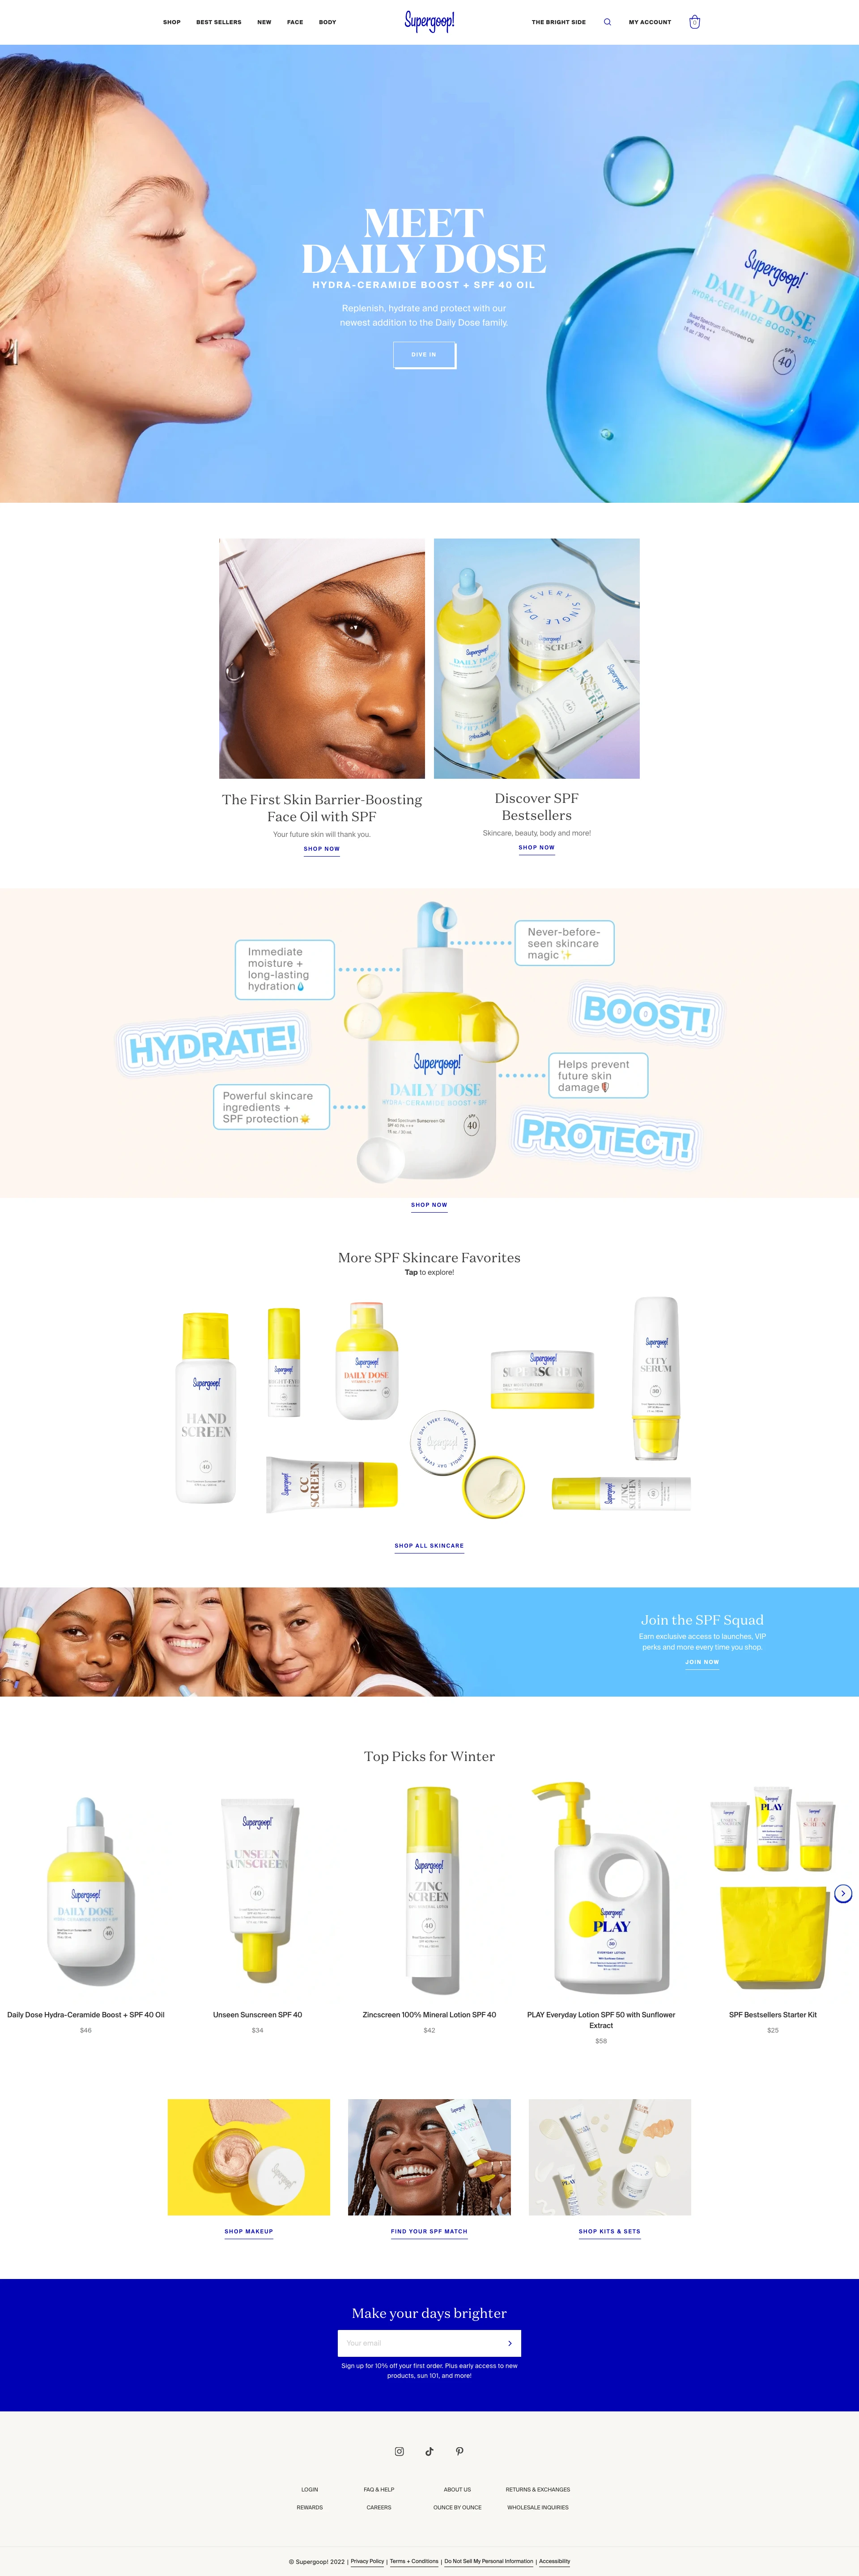 Supergoop Landing Page Example: Hi, we’re Supergoop! You may know us as the Experts in SPF™. For more than 15 years, product has been our purpose — something our founder, Holly, has said since the beginning. But our mission is about so much more than just sunscreen...